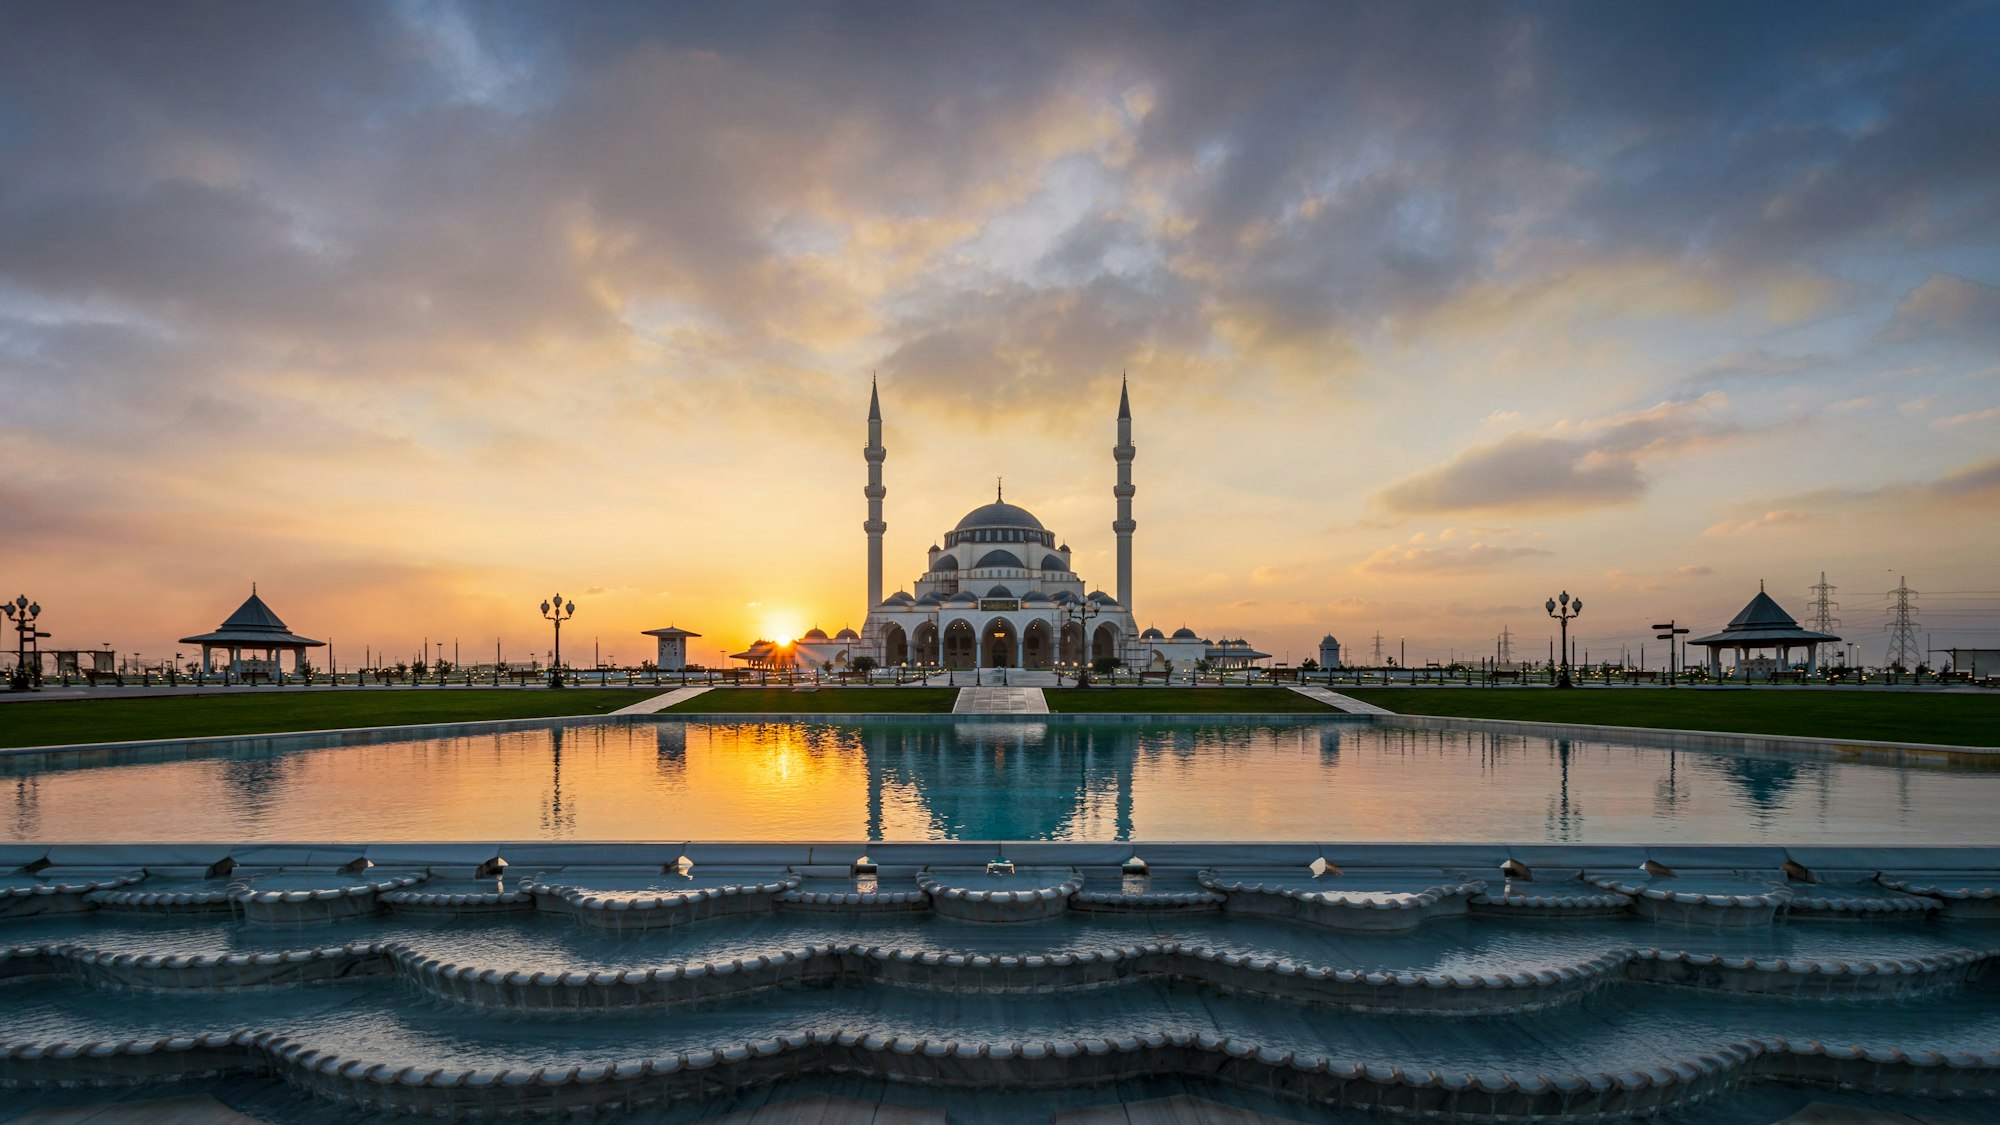 Wondrous Sharjah Mosque reflected in the pool waters on background of the cloudy sunset sky